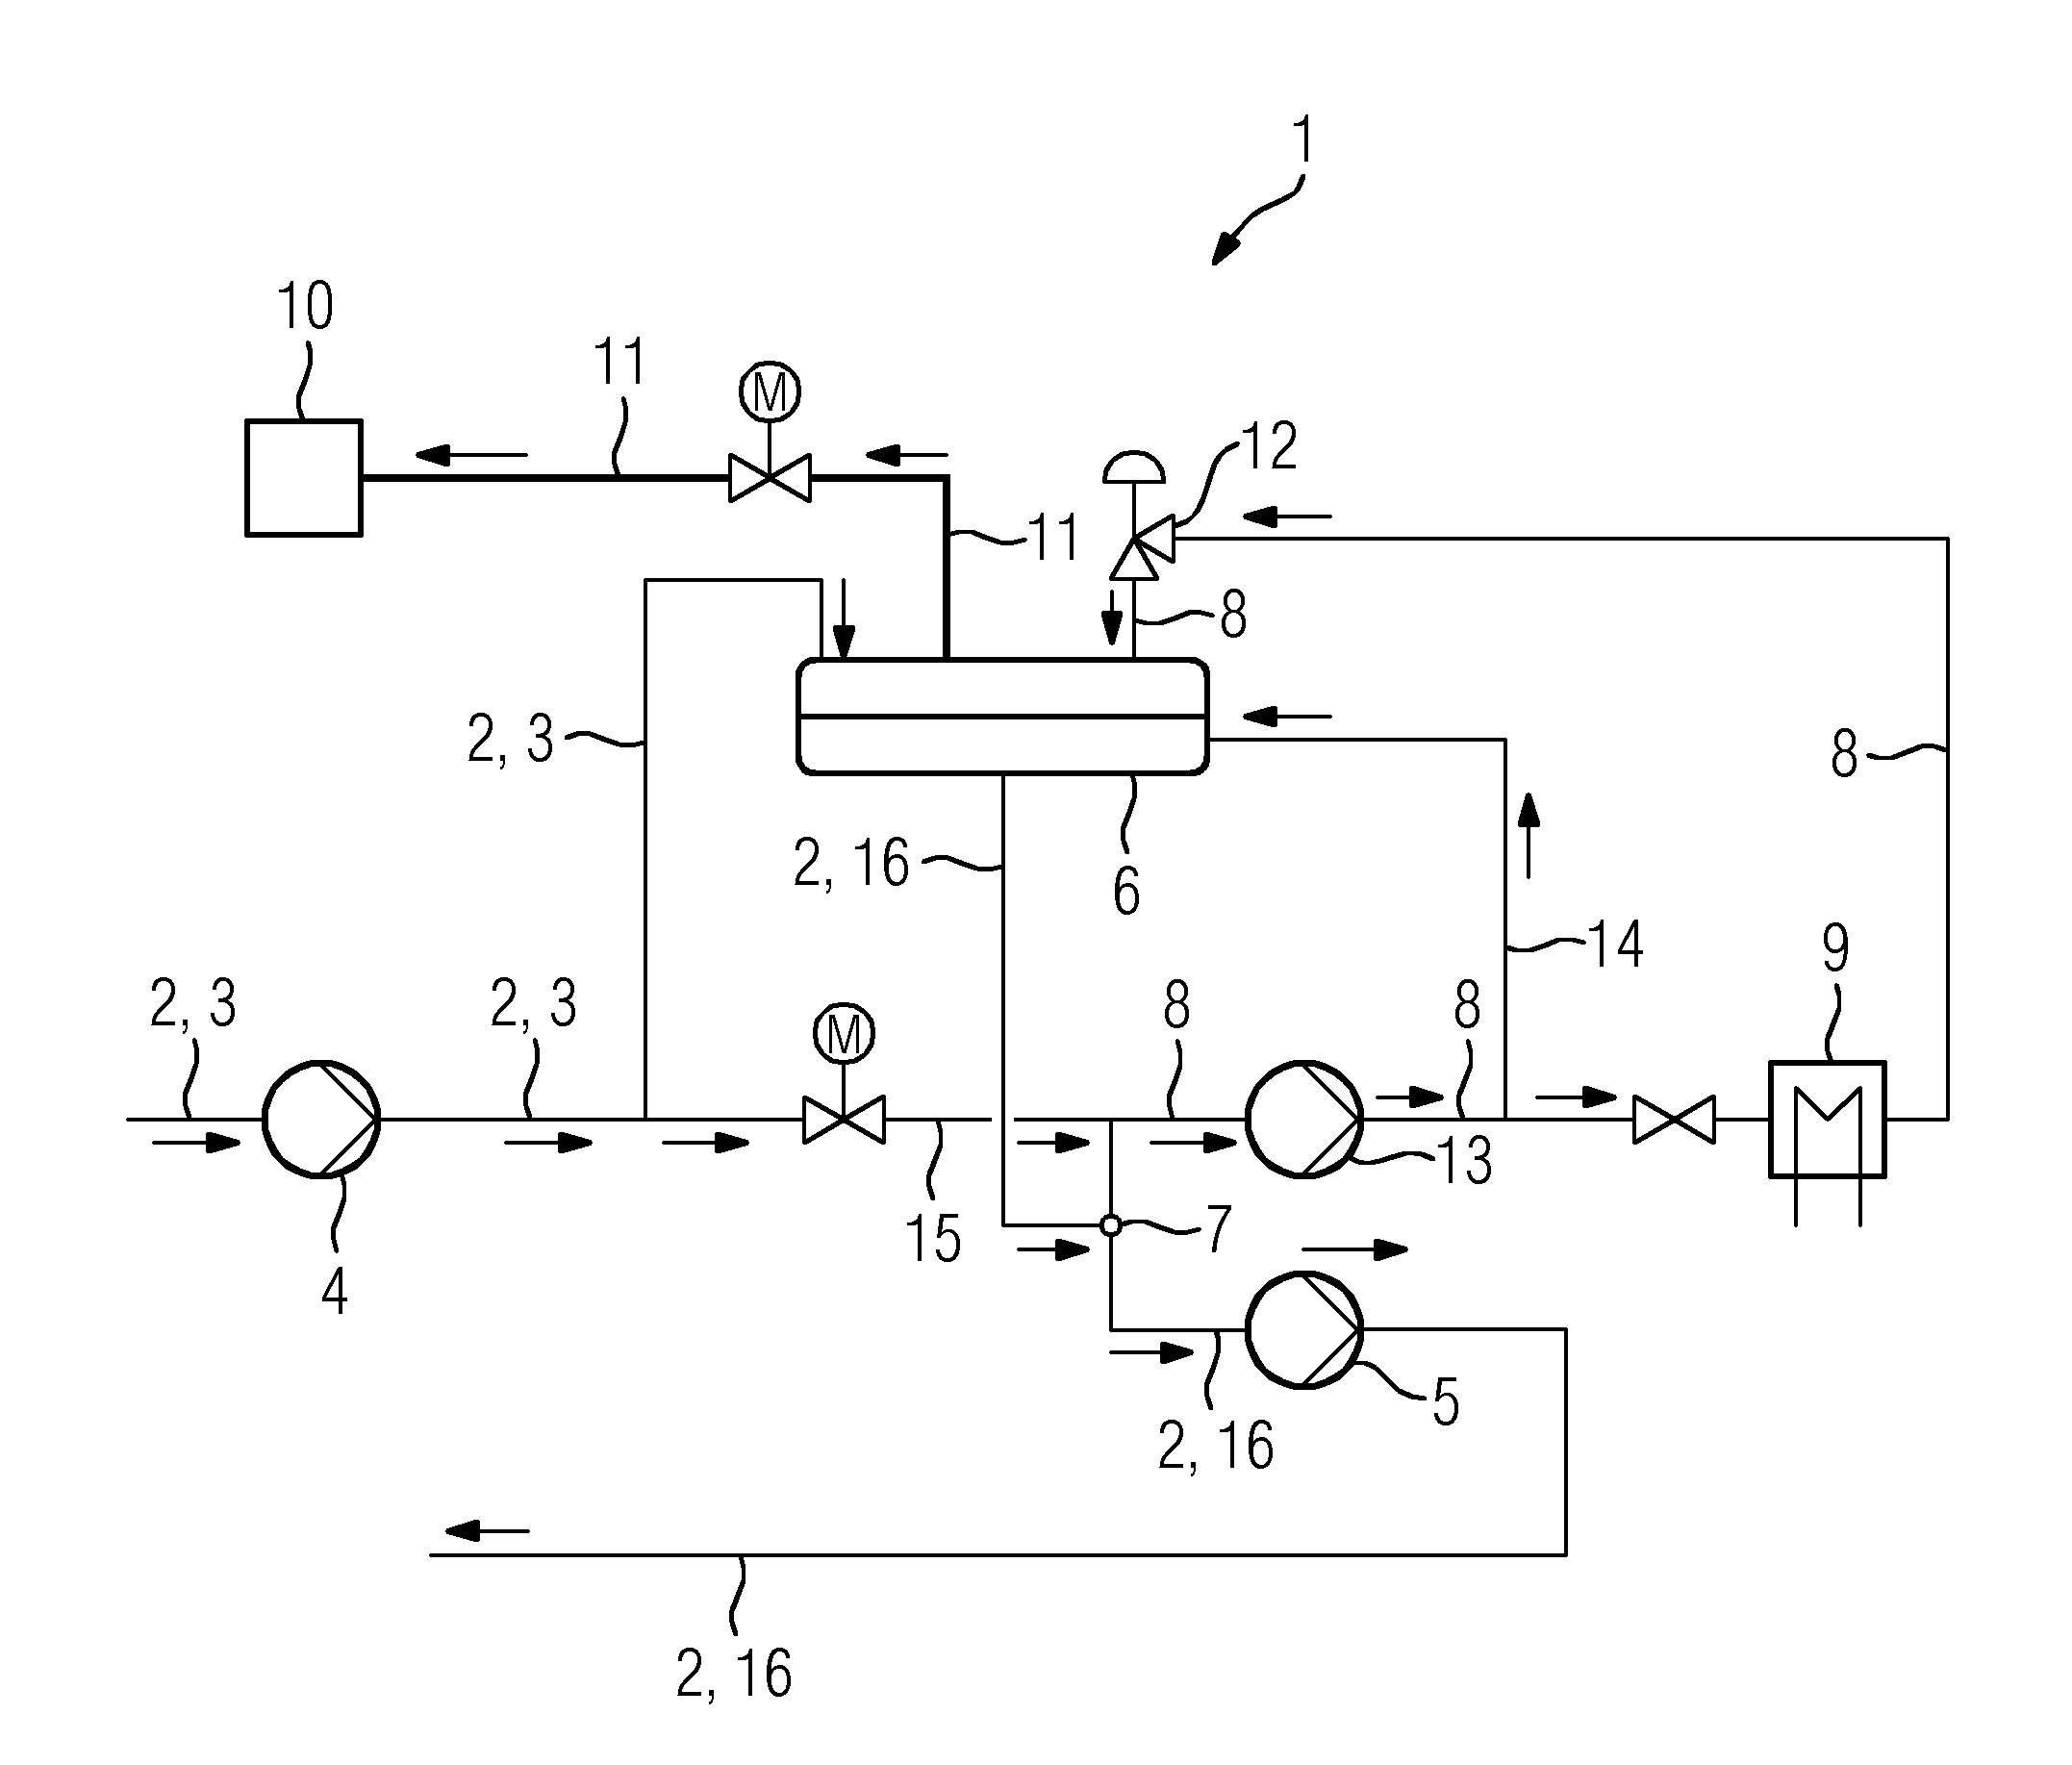 Auxiliary steam generator system for a power plant